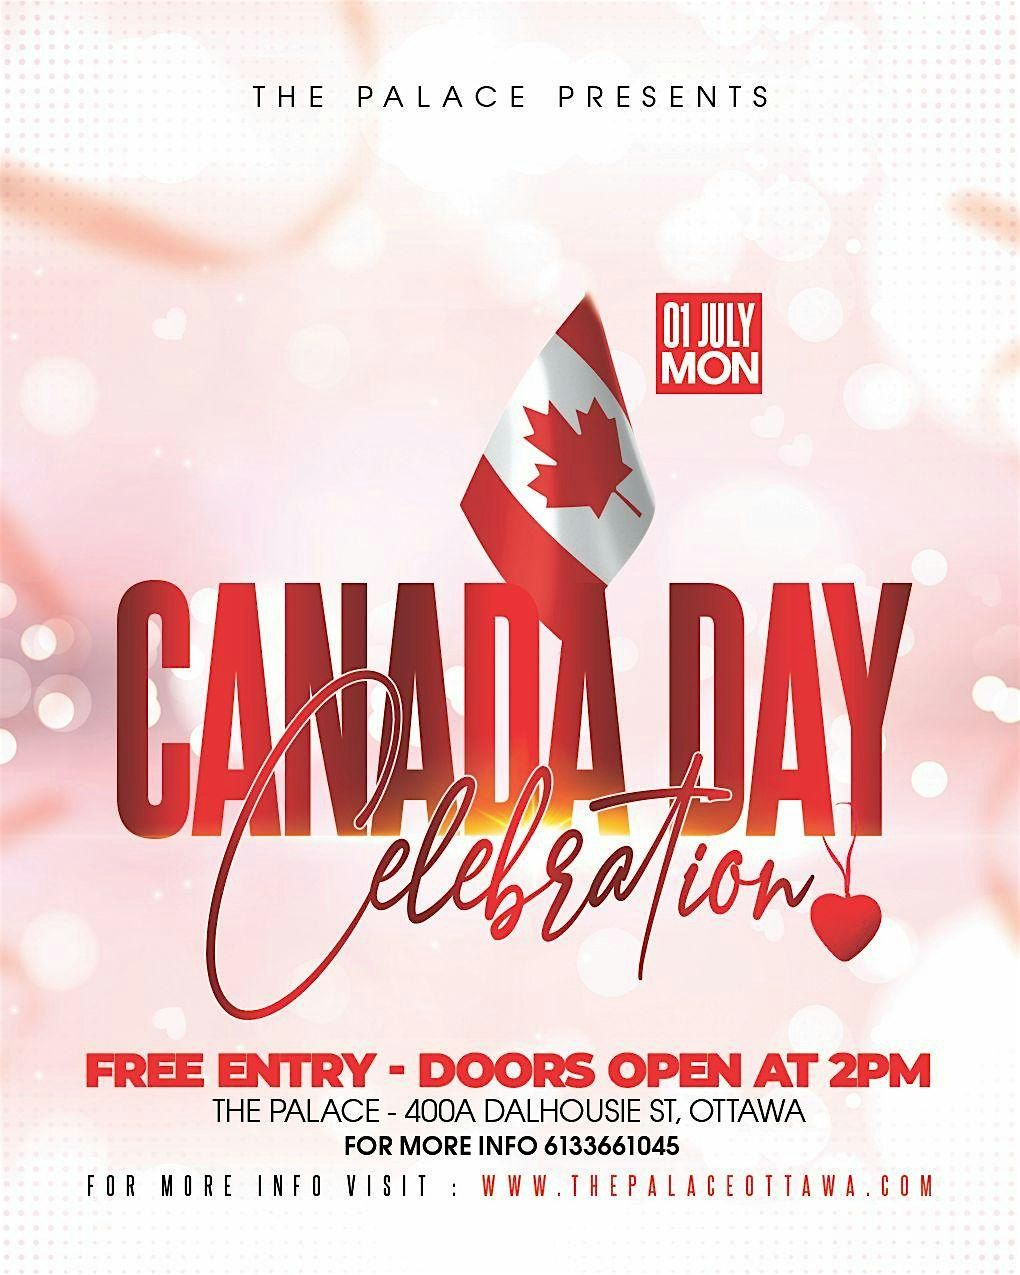 CANADA DAY CELEBRATION FROM 2PM-FOOD-DRINKS-MUSIC-DANCE